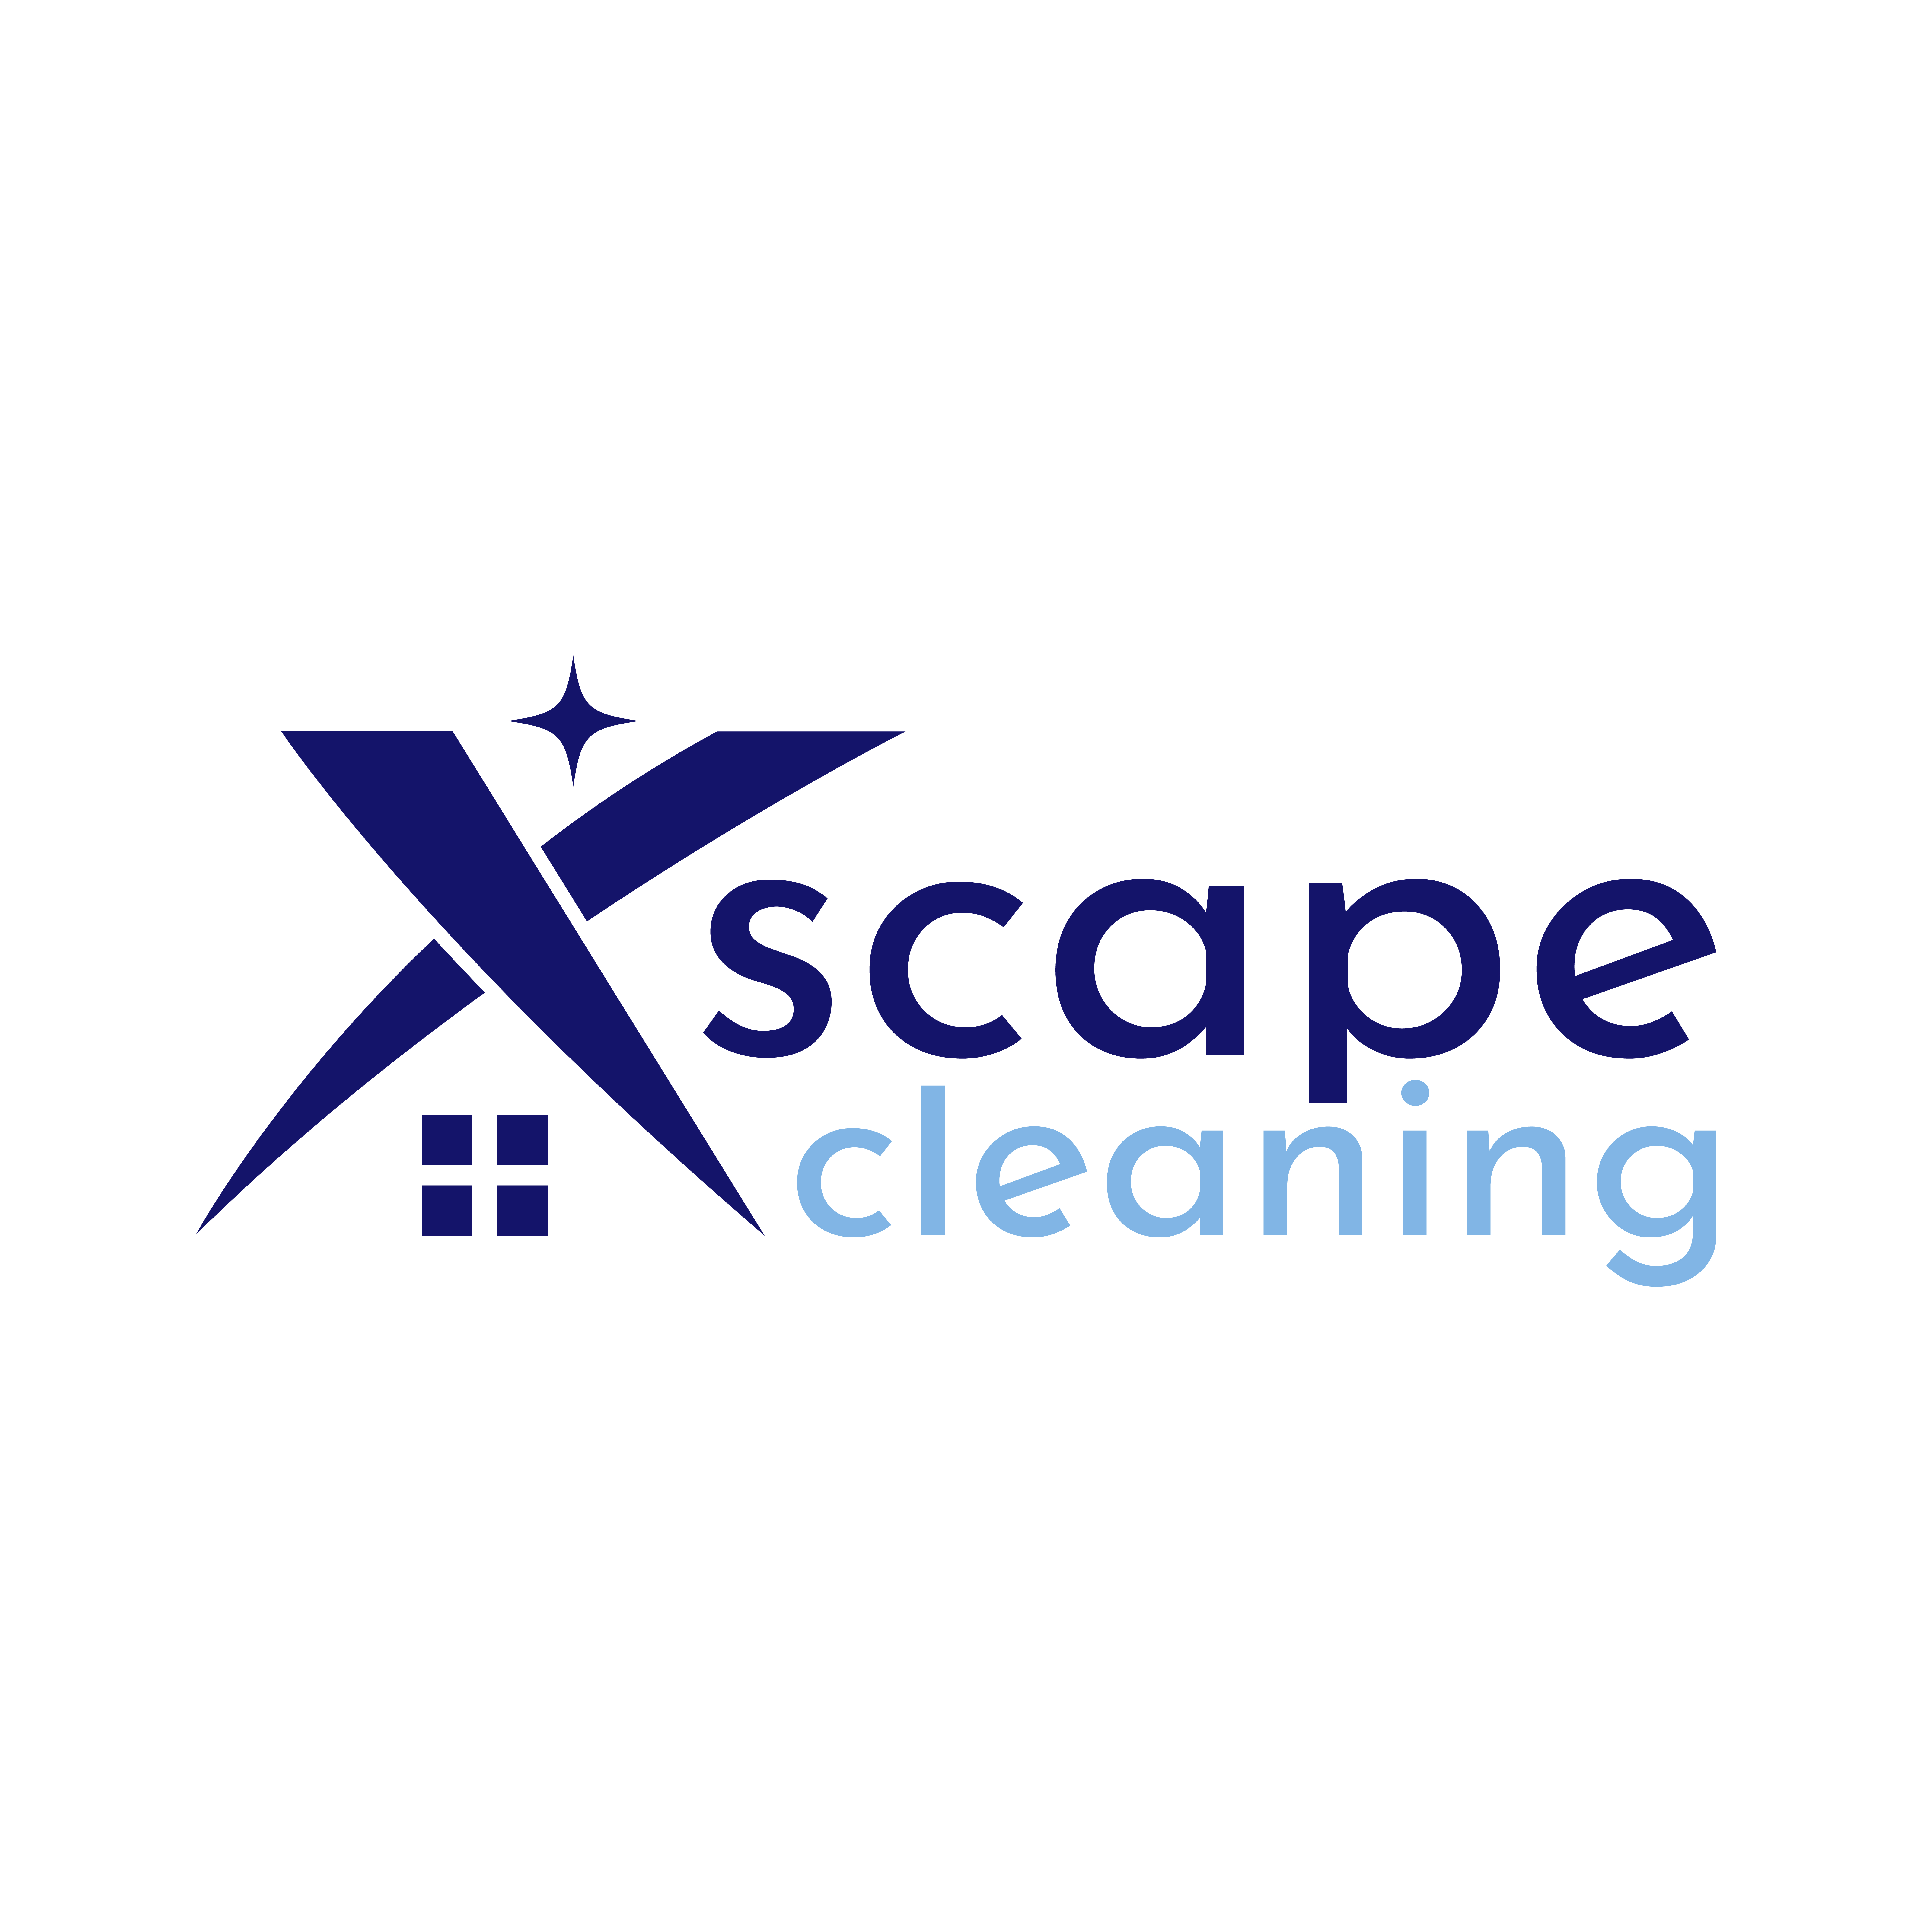 Xscape Cleaning's logo